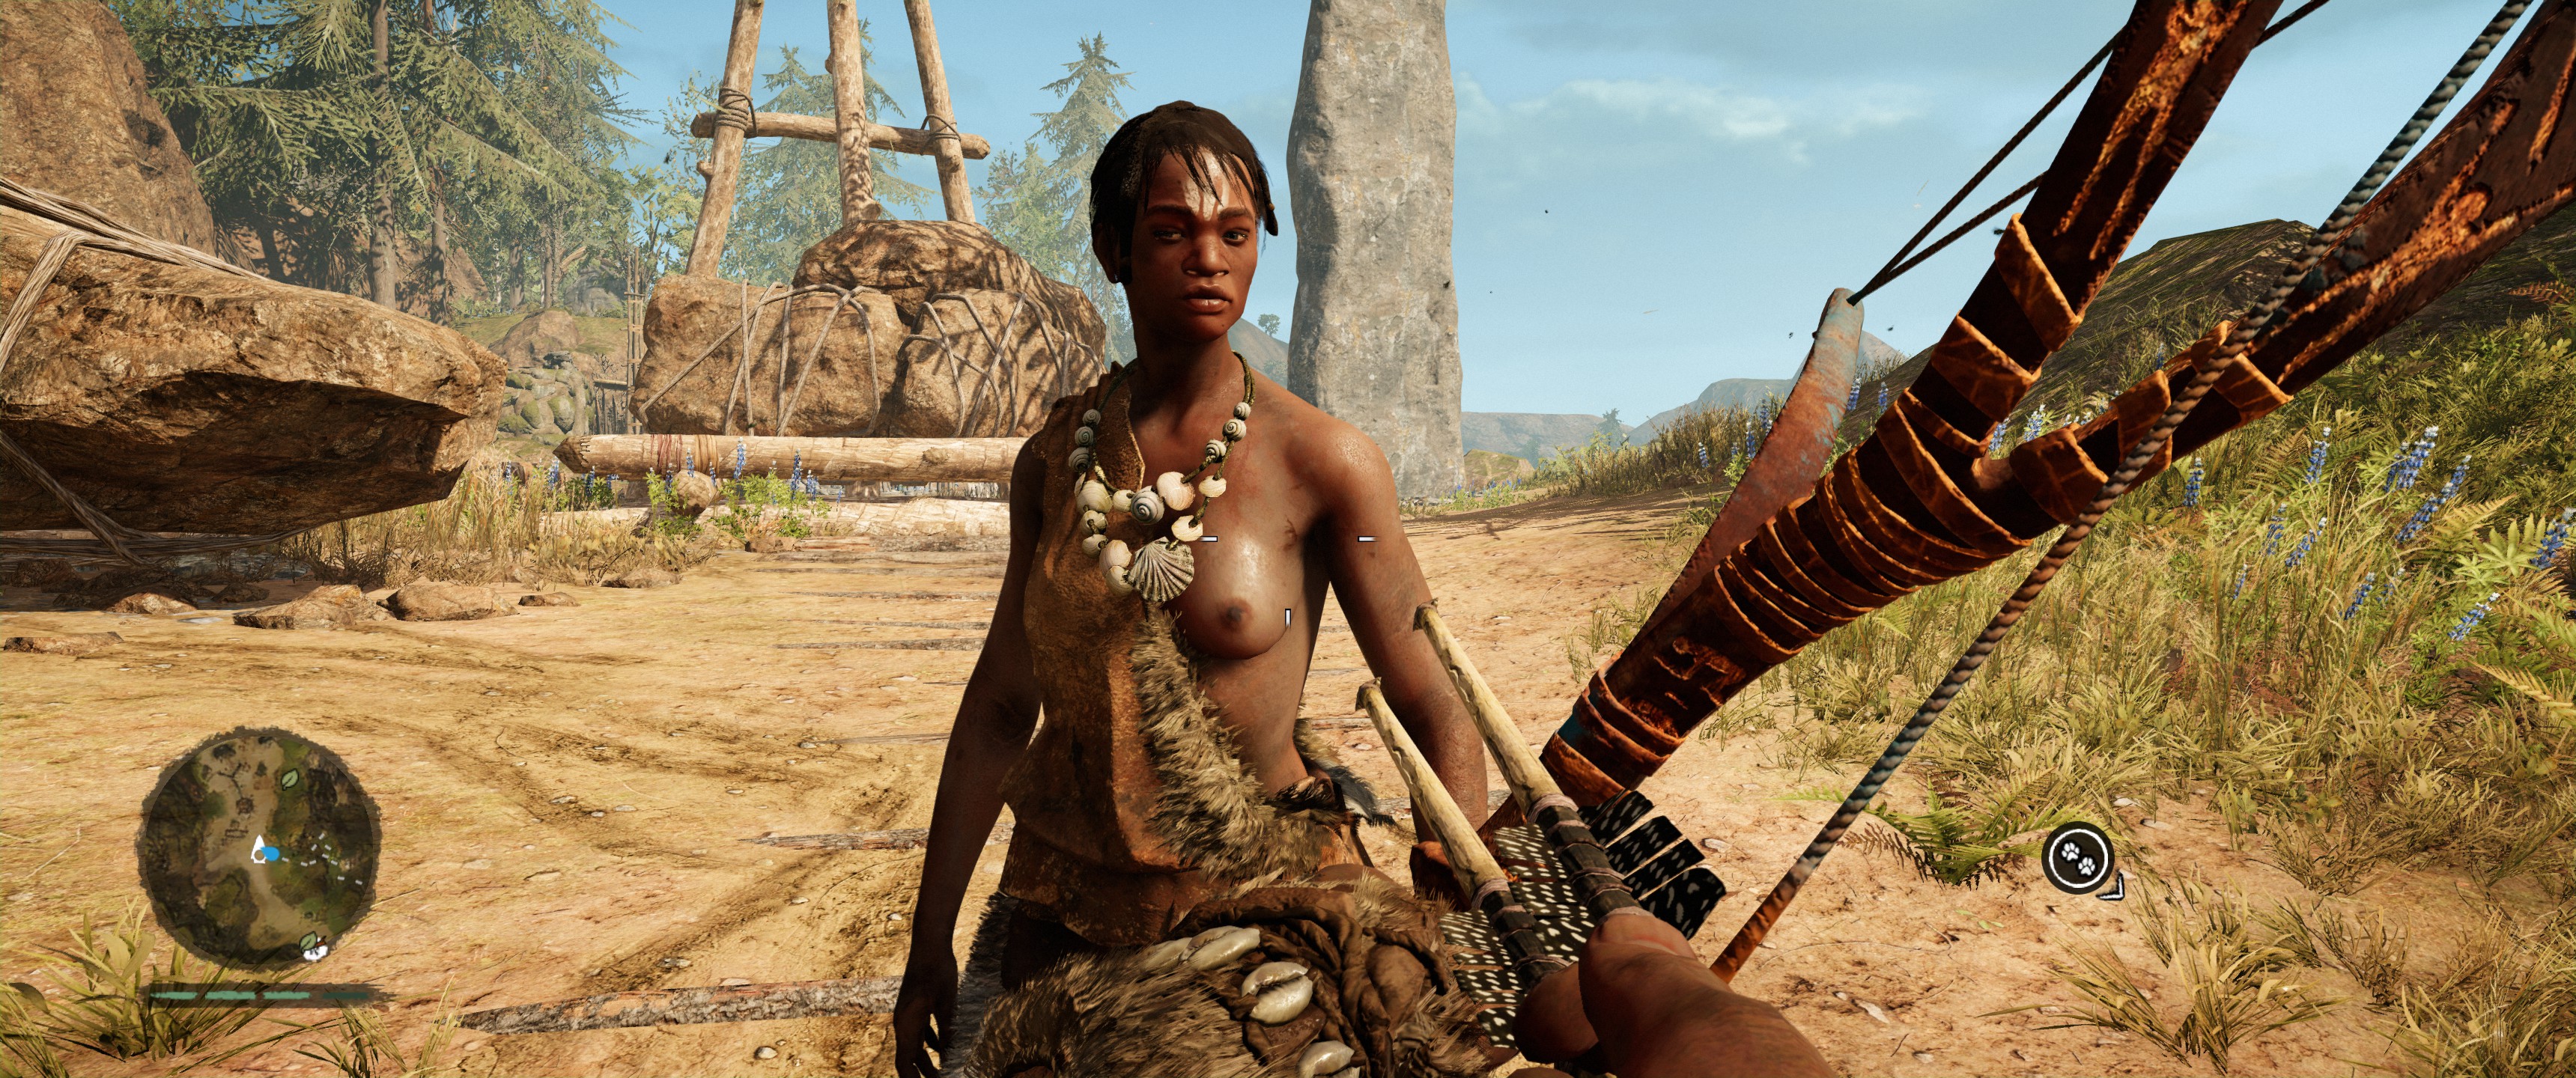 alvin chipper recommends far cry primal boobs pic